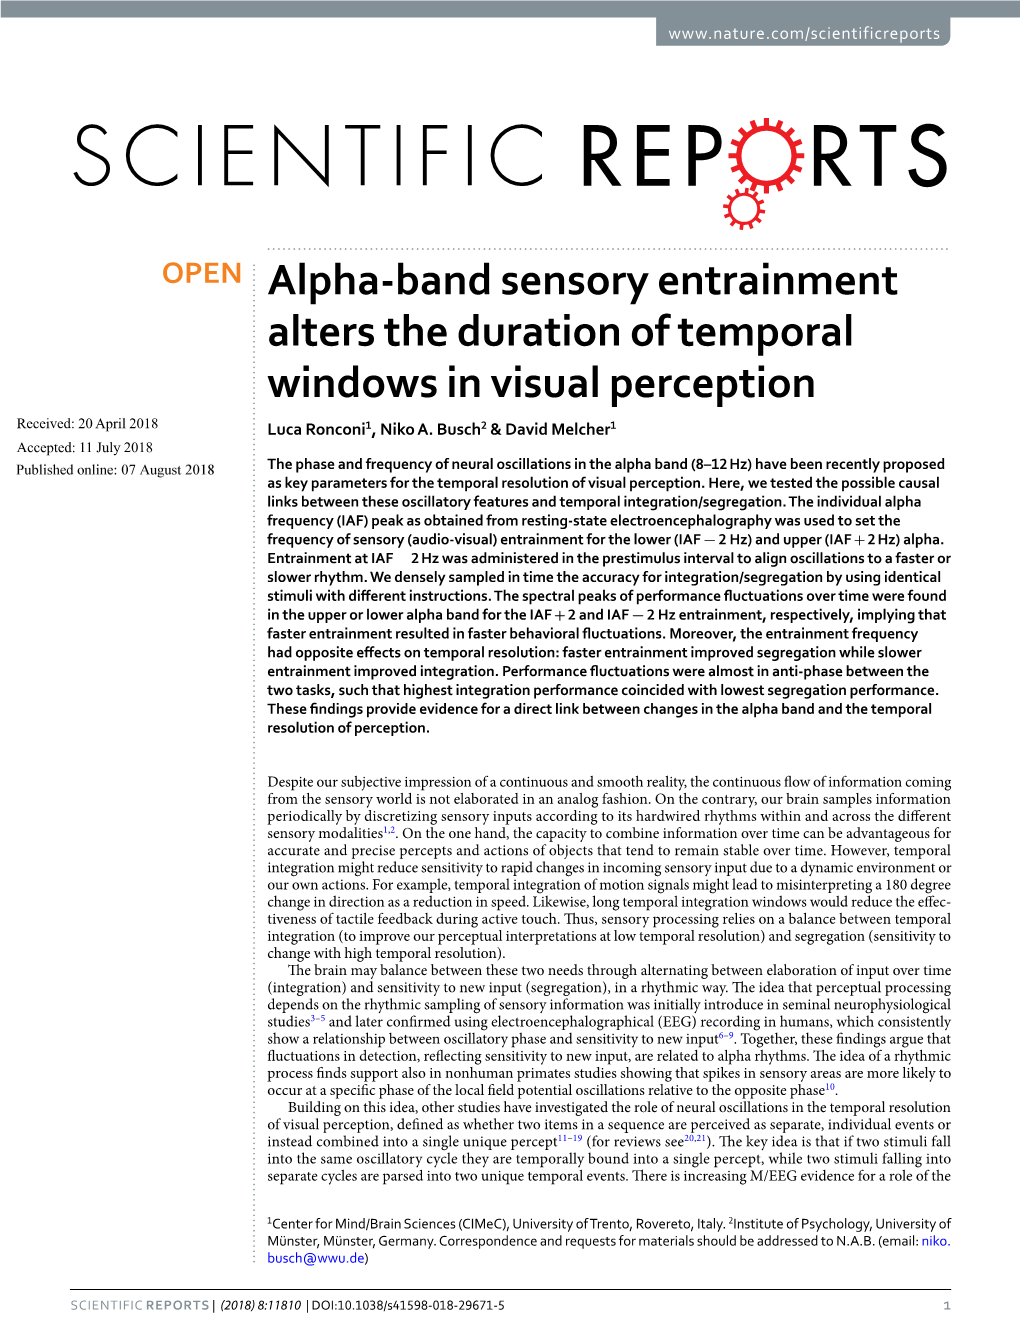 Alpha-Band Sensory Entrainment Alters the Duration of Temporal Windows in Visual Perception Received: 20 April 2018 Luca Ronconi1, Niko A